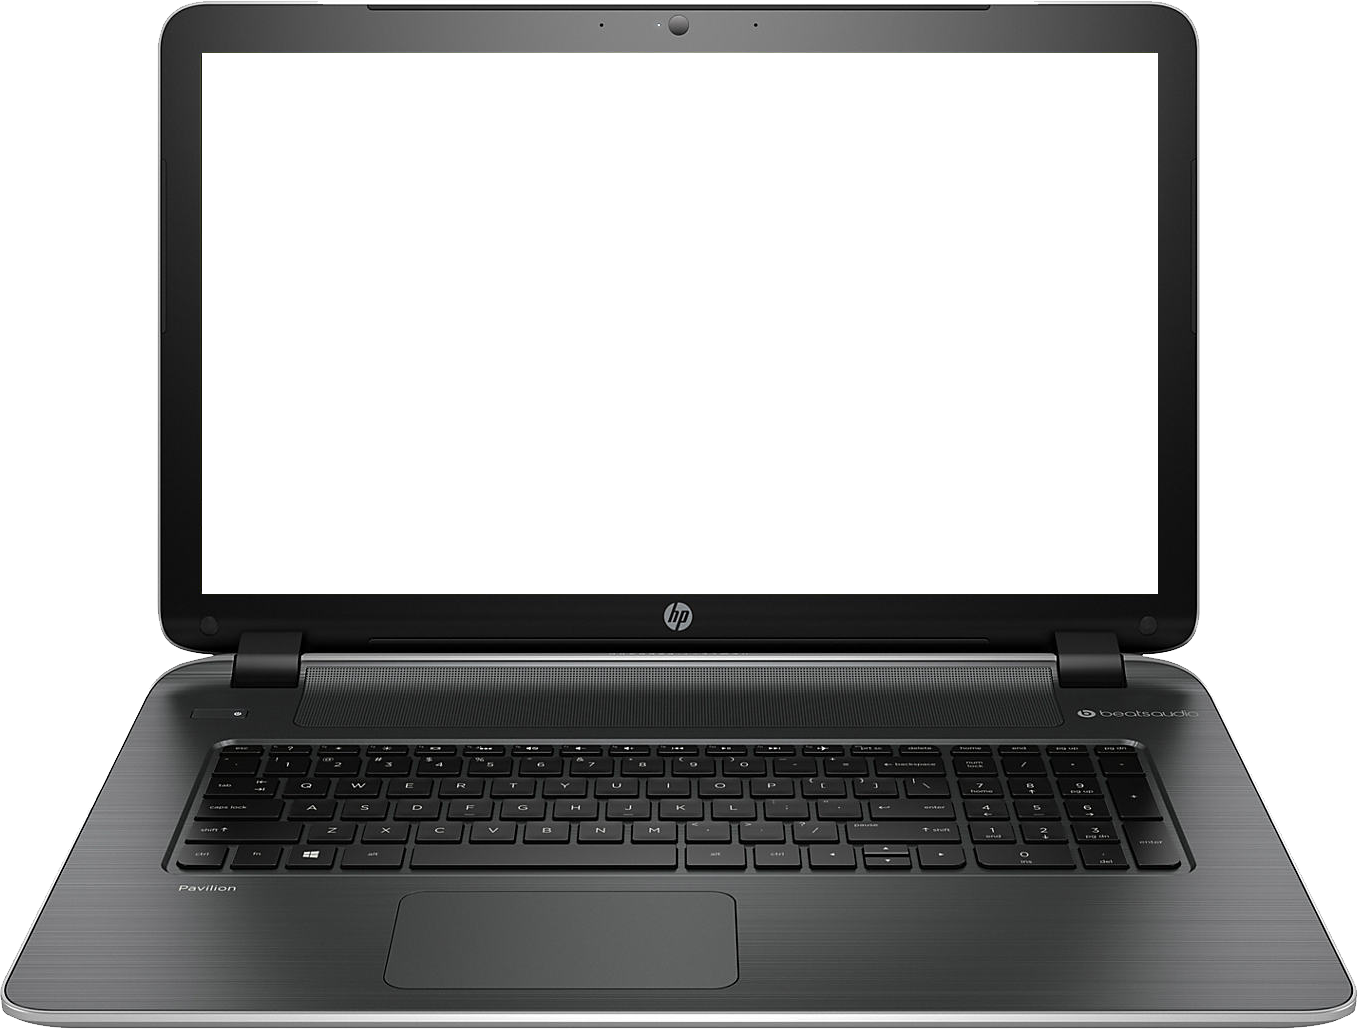 Laptops images notebook image laptop clipart image